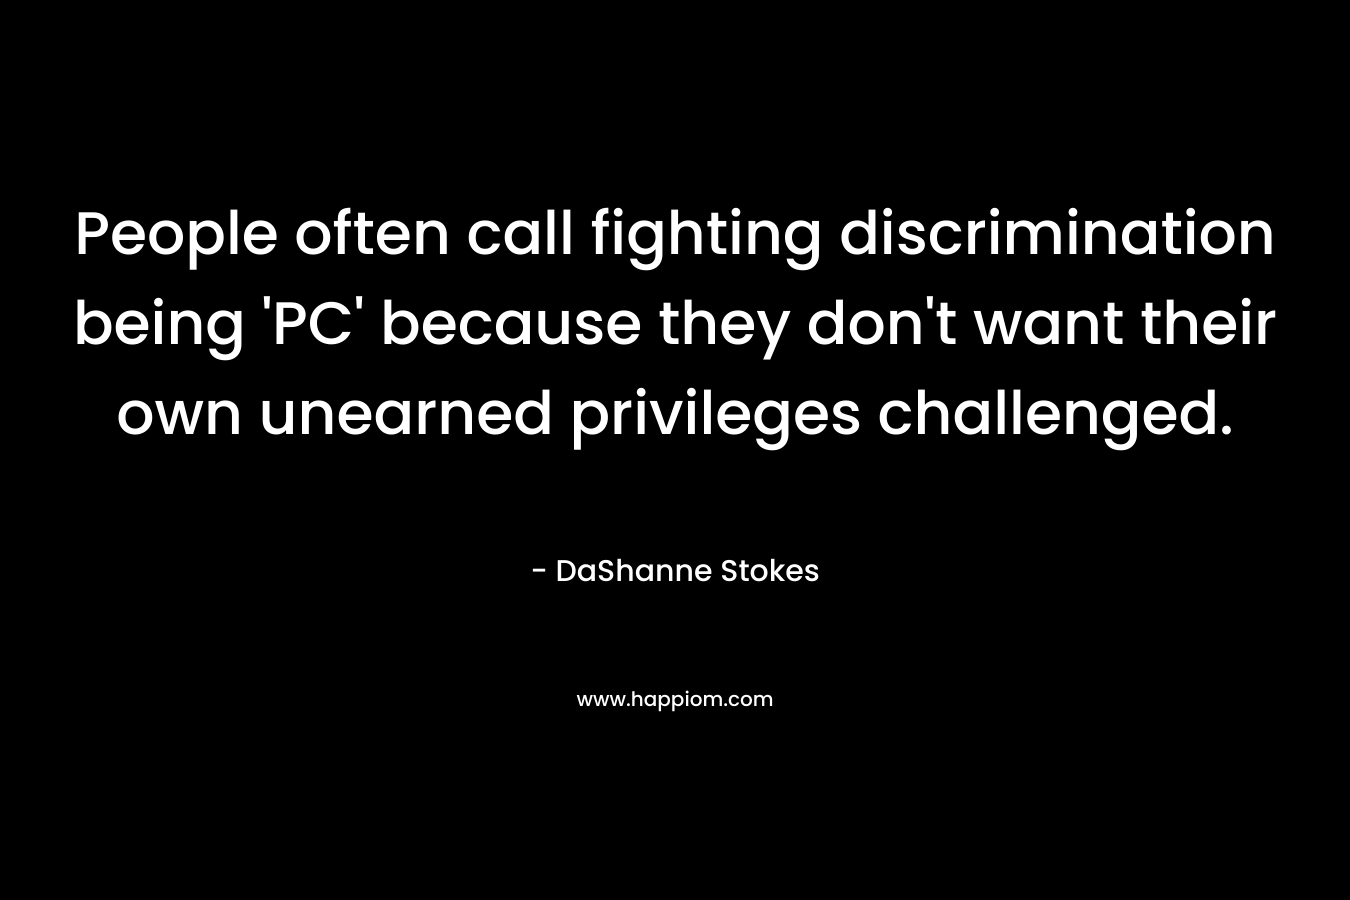 People often call fighting discrimination being 'PC' because they don't want their own unearned privileges challenged.